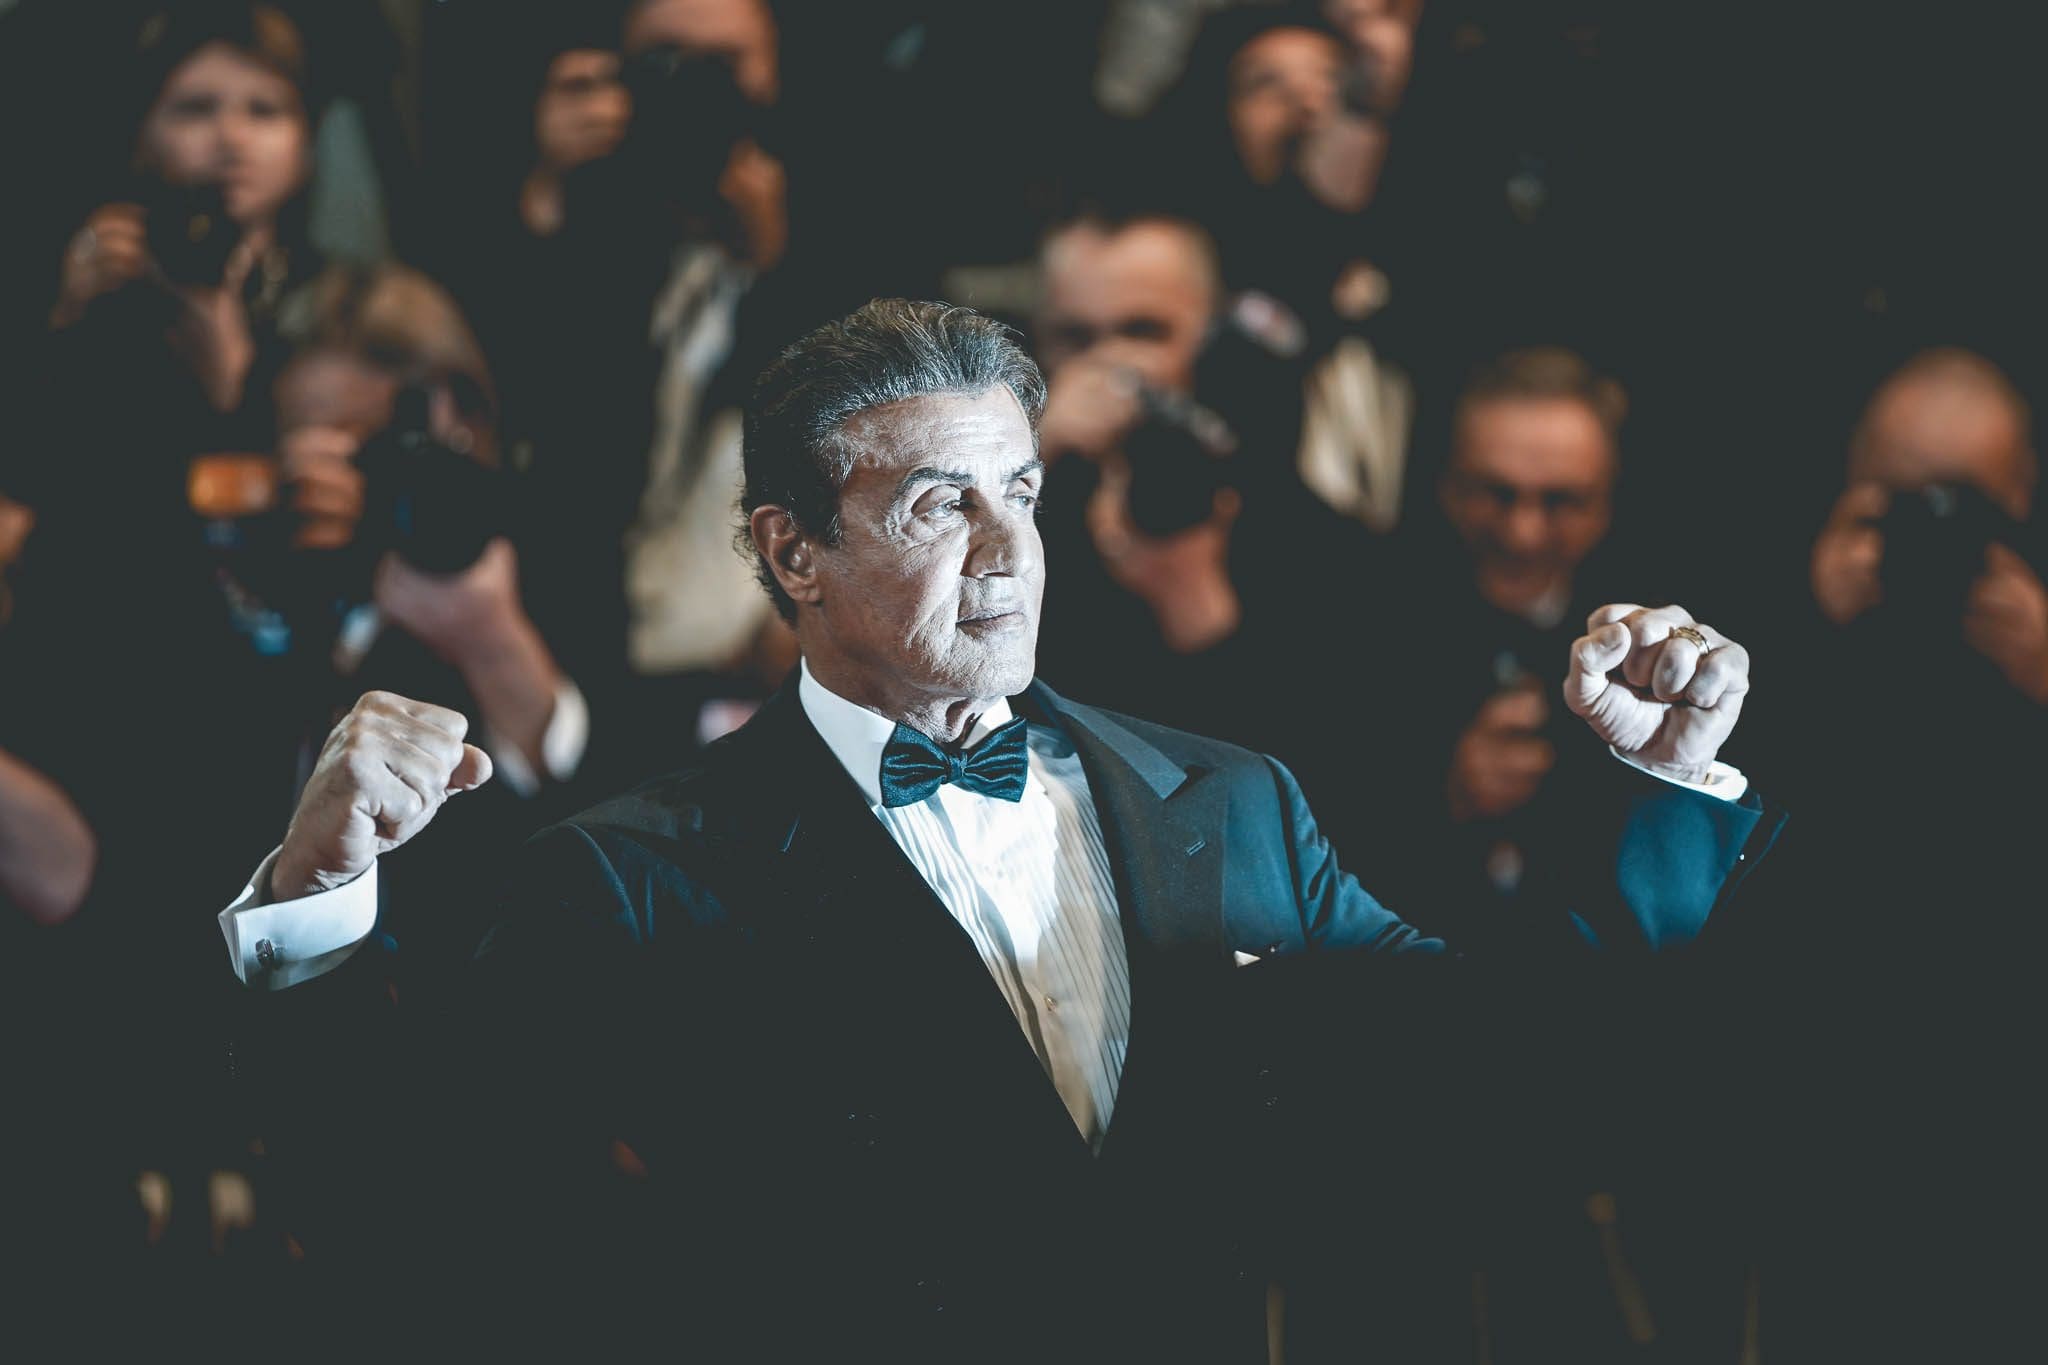 Tulsa King, First look: Sylvester Stallone als New Yorkse maffiabaas